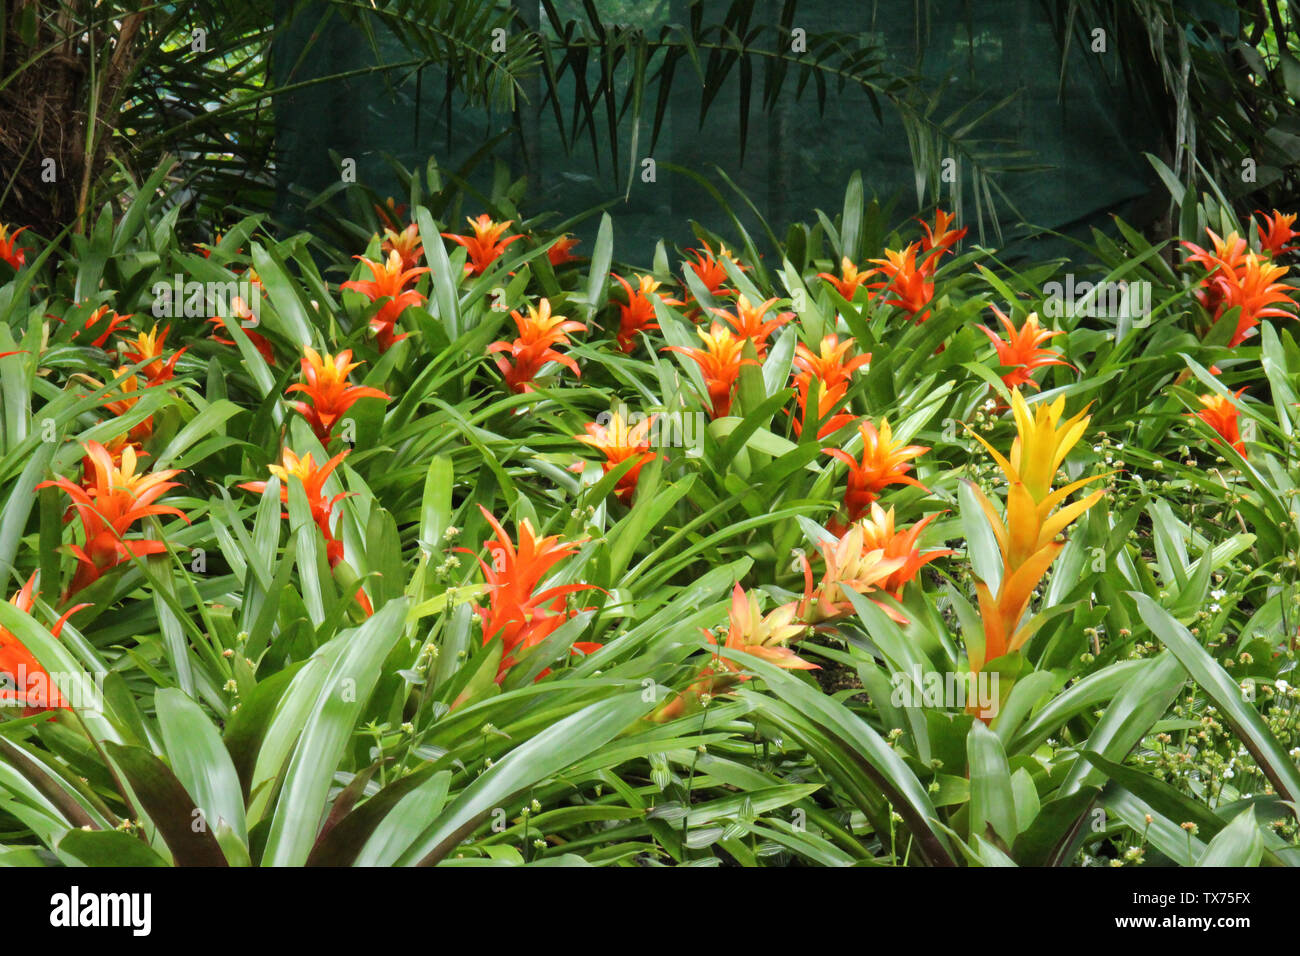 A large grouping of orange and yellow Guzmania Bromeliads growing in a tropical garden Stock Photo